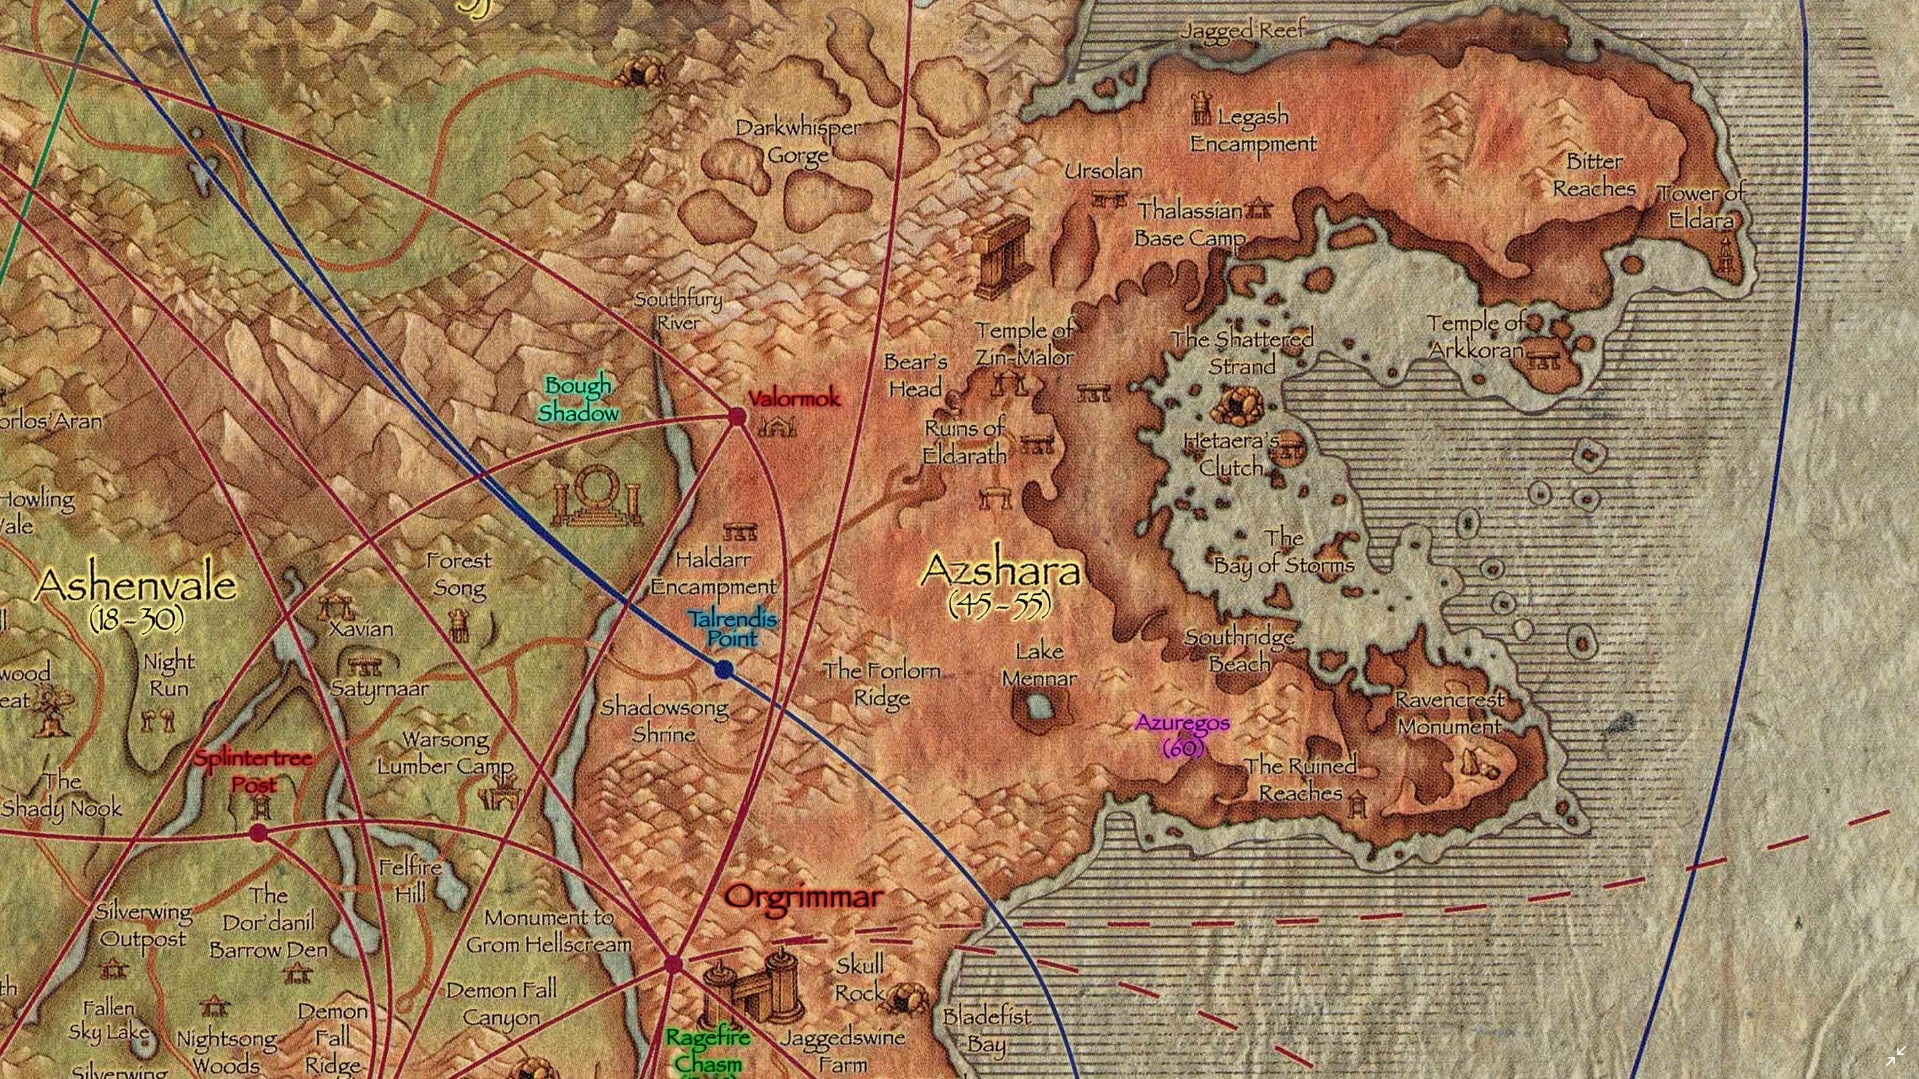 Download Demon Fall Canyon WC3 Map [Other]